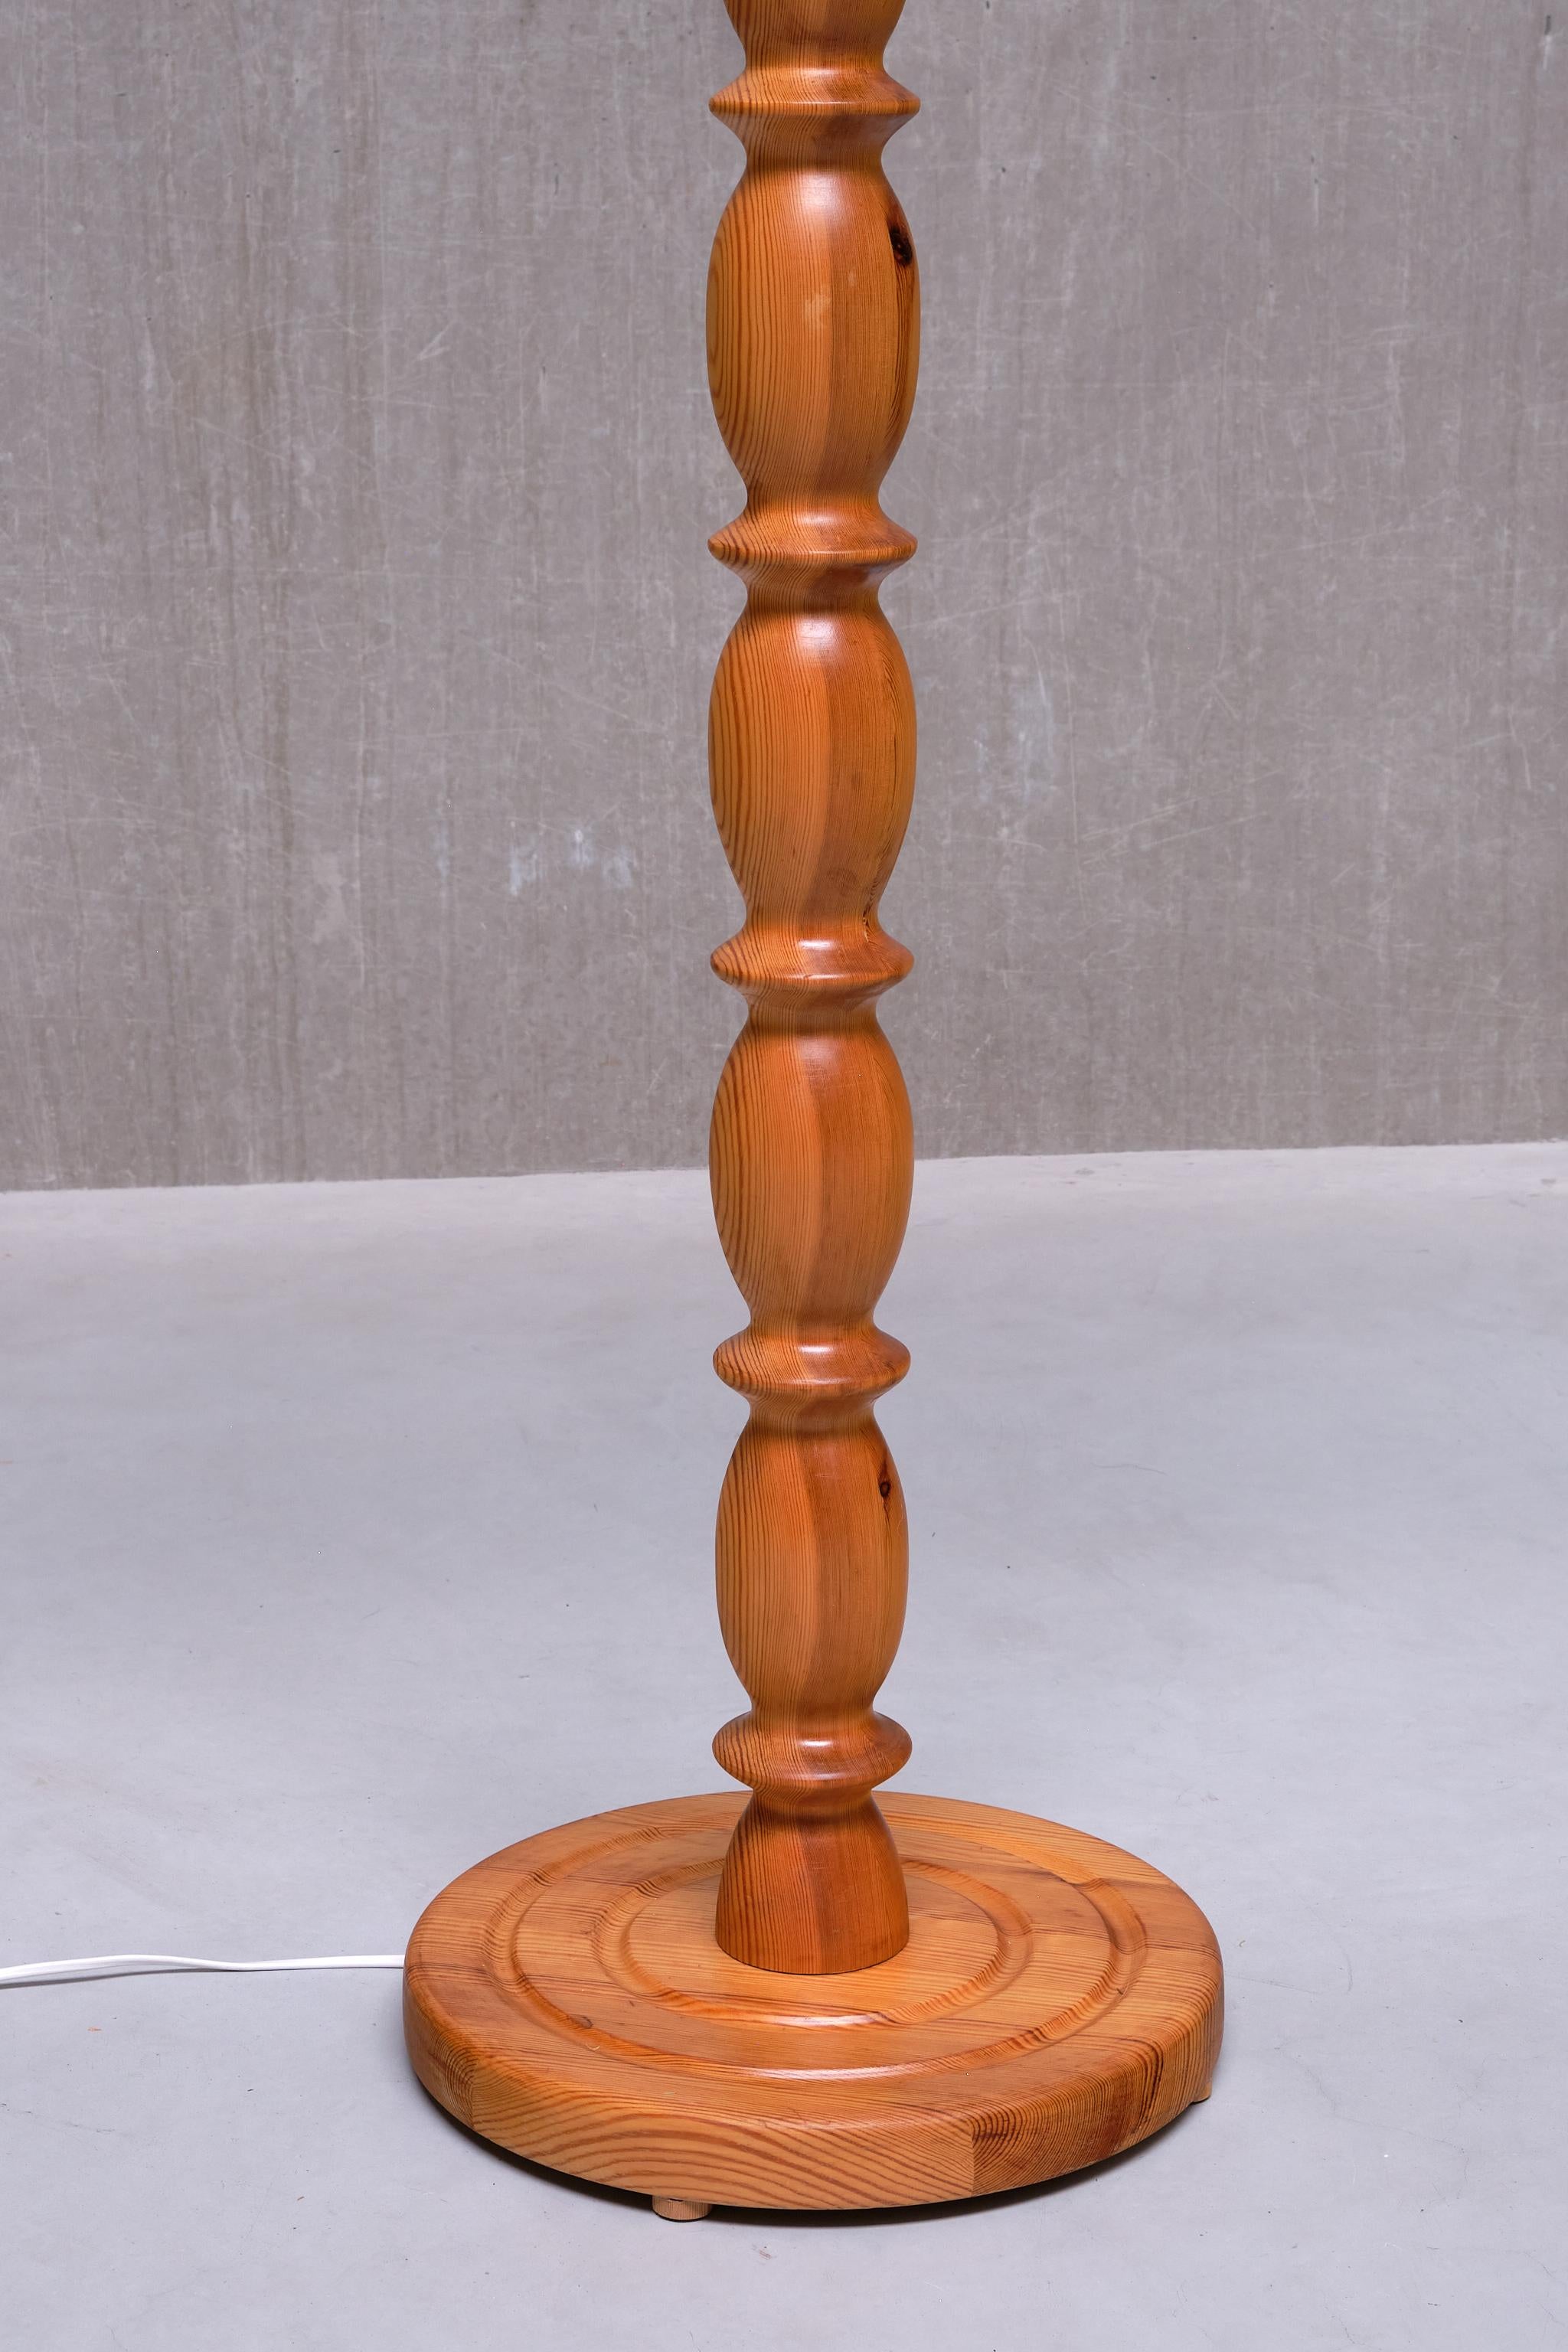 Swedish Modern Floor Lamp in Carved Solid Pine Wood, 1960s For Sale 6